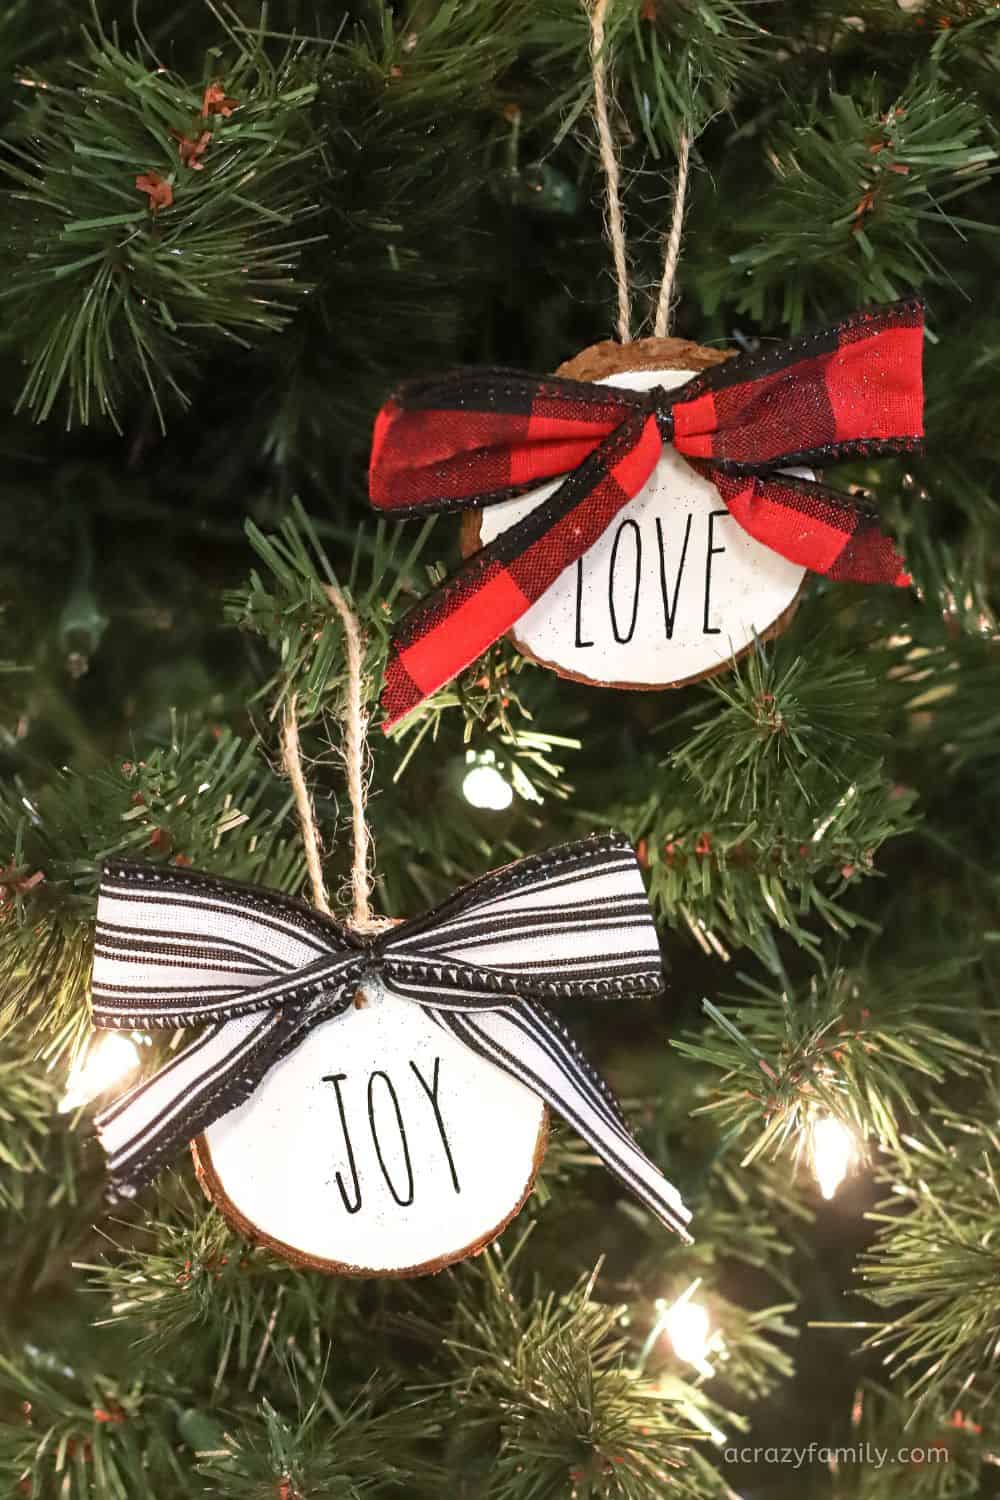 Wooden Slice Ornament hanging on tree